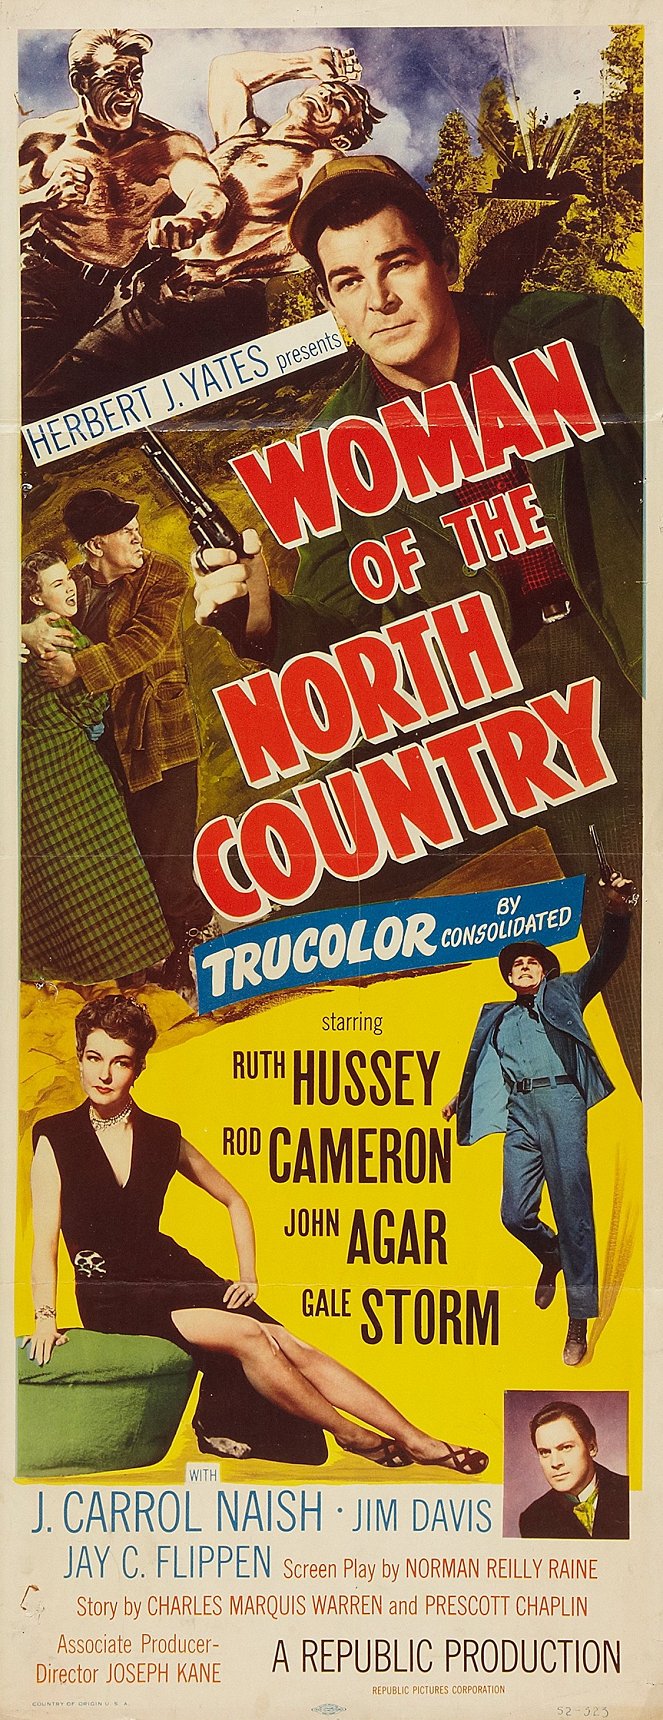 Woman of the North Country - Julisteet